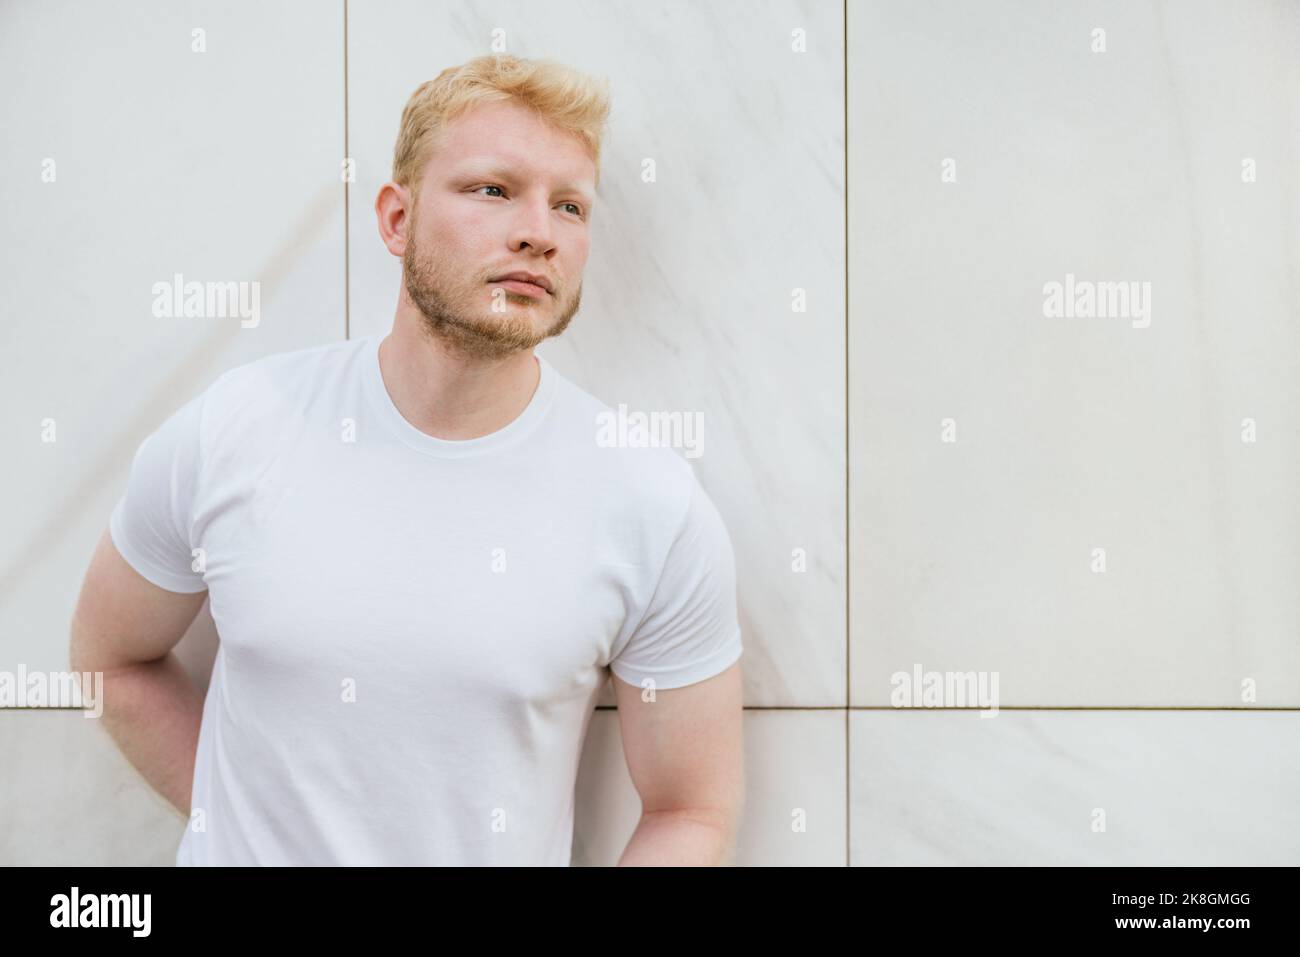 Pensive bearded adult blond haired man in white t shirt standing near white tiled wall looking away Stock Photo